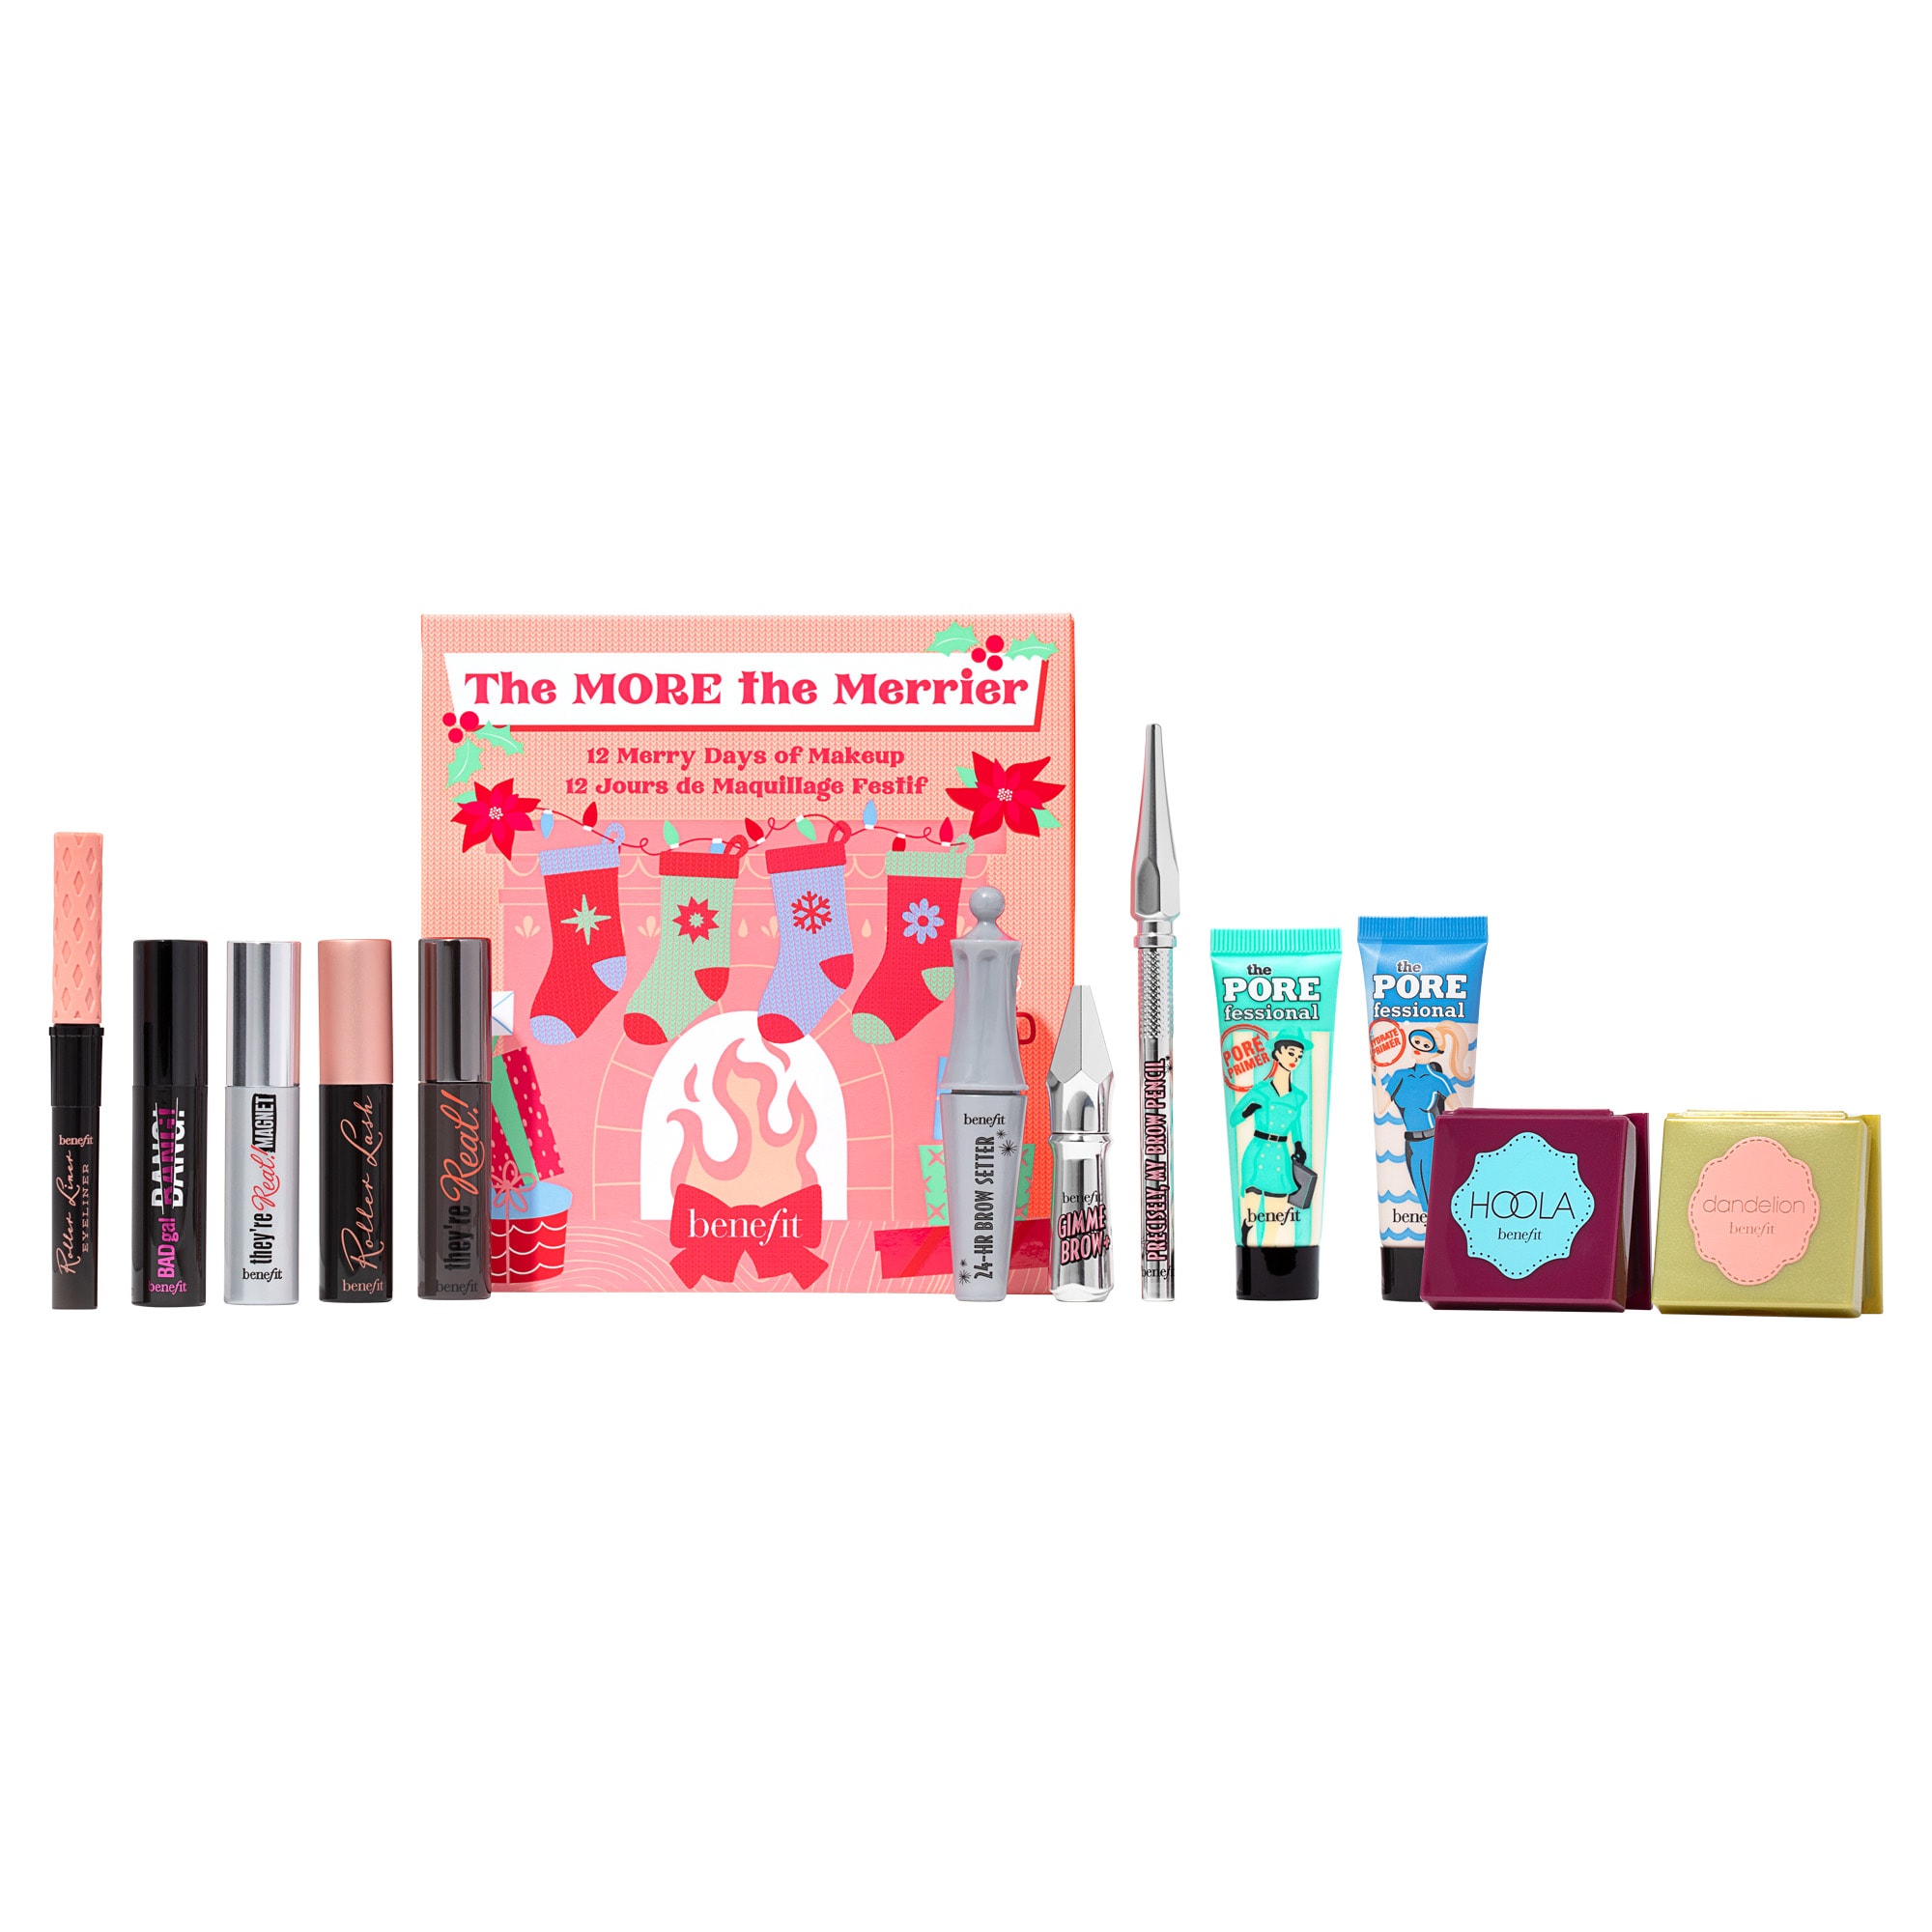 assortment of cosmetic products